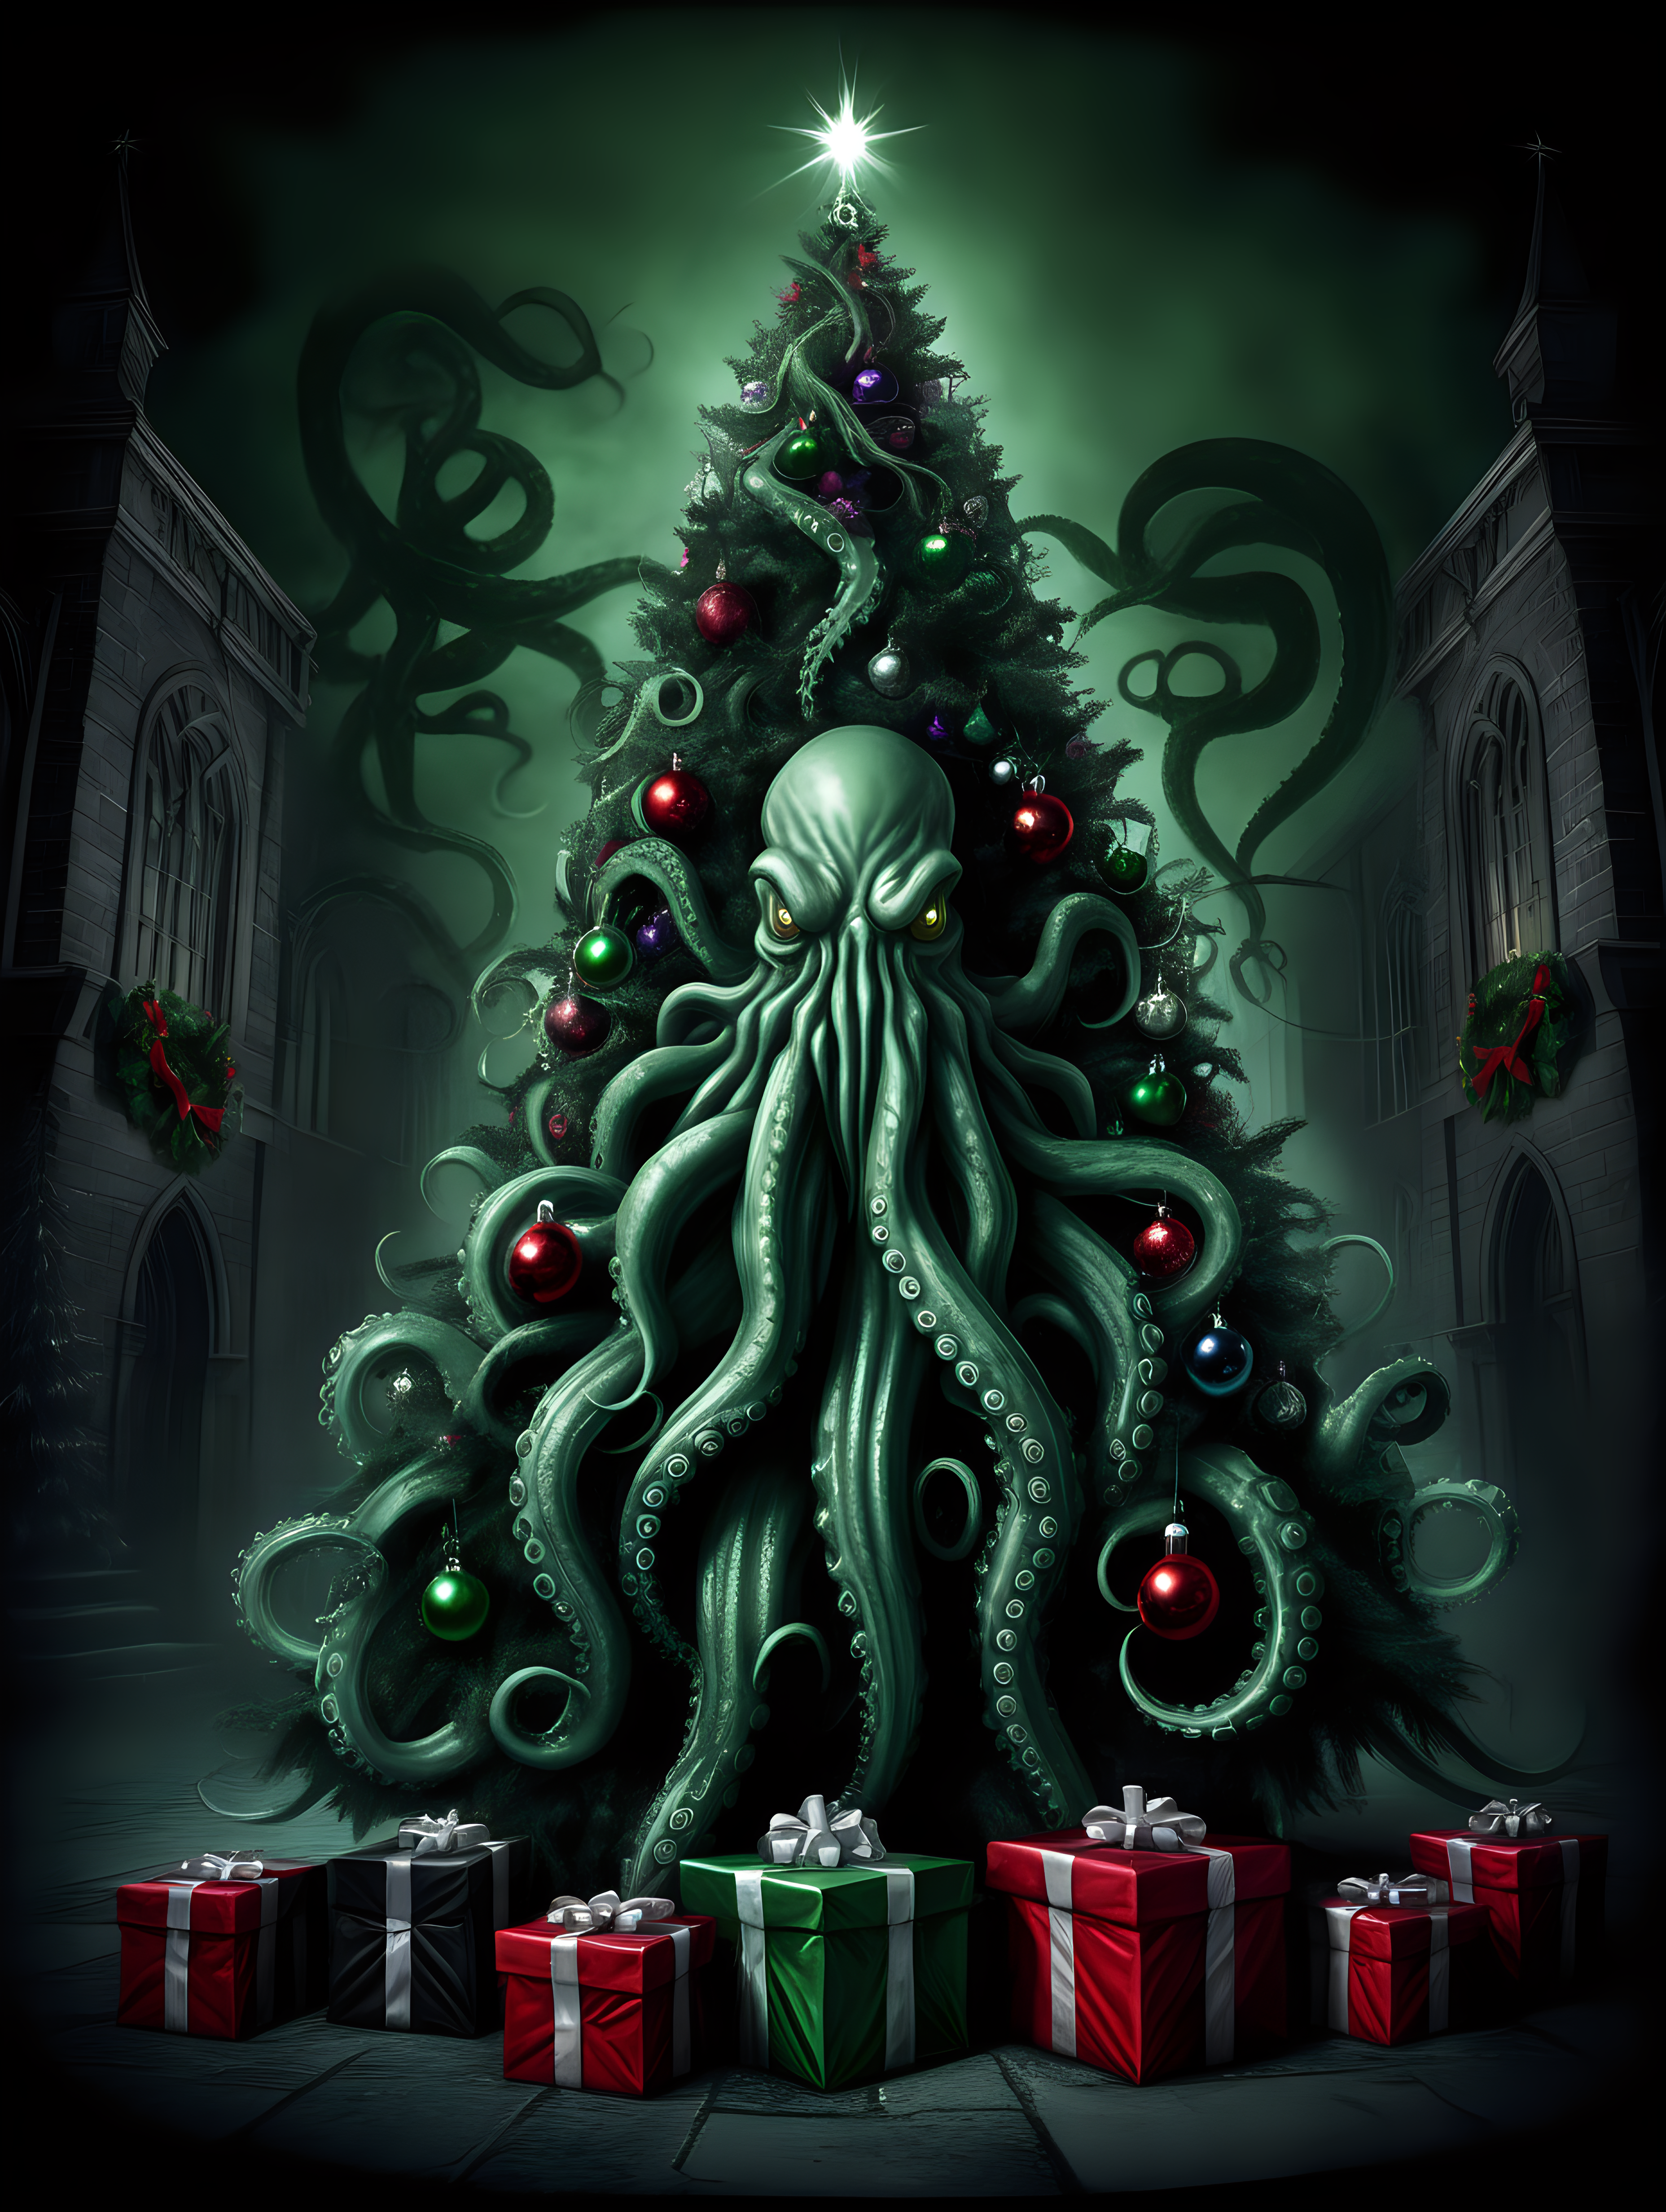 Gothic Christmas tree with Cthulhu’s tentacles reaching through it. Must be dark and gothic with eldritch themes. Presents under the tree must also be dark and gothic in a variety of shapes and dark colours. The background must feel sinister and creepy. The tentacles should be dark green. Make it very eldritch 